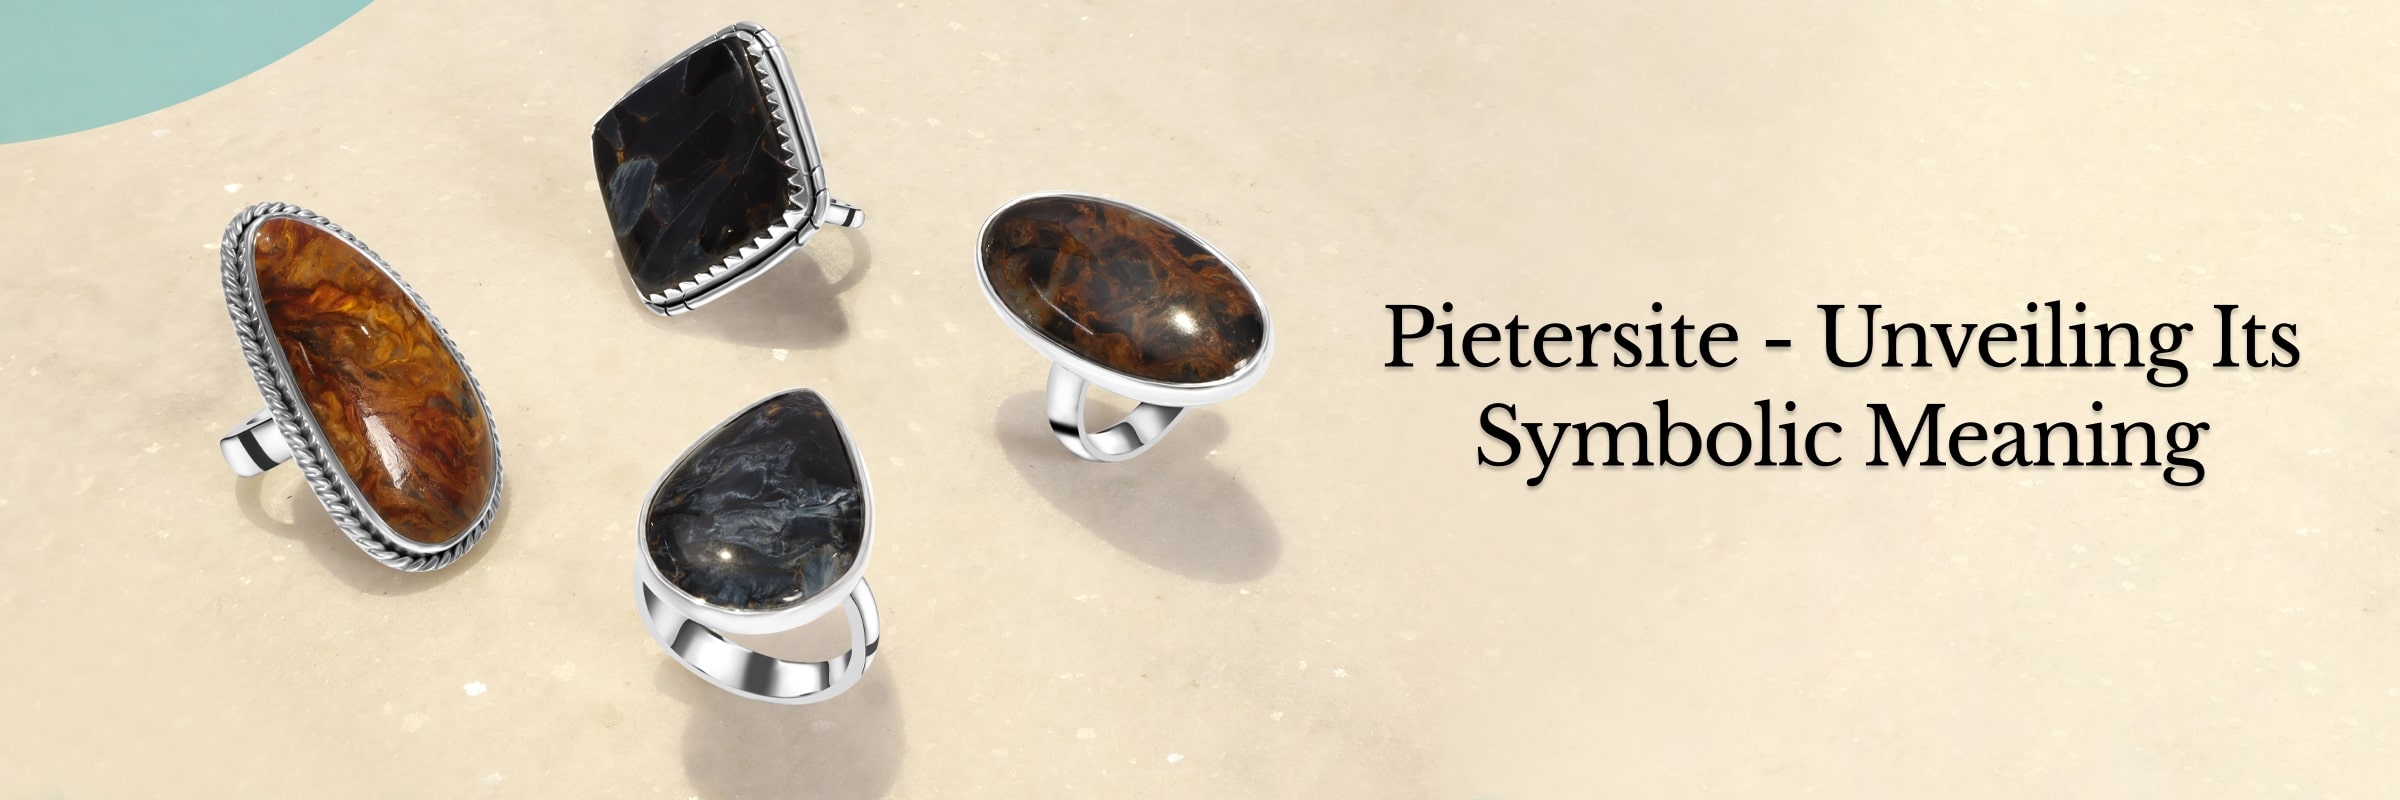 What Is The Meaning attached to Pietersite